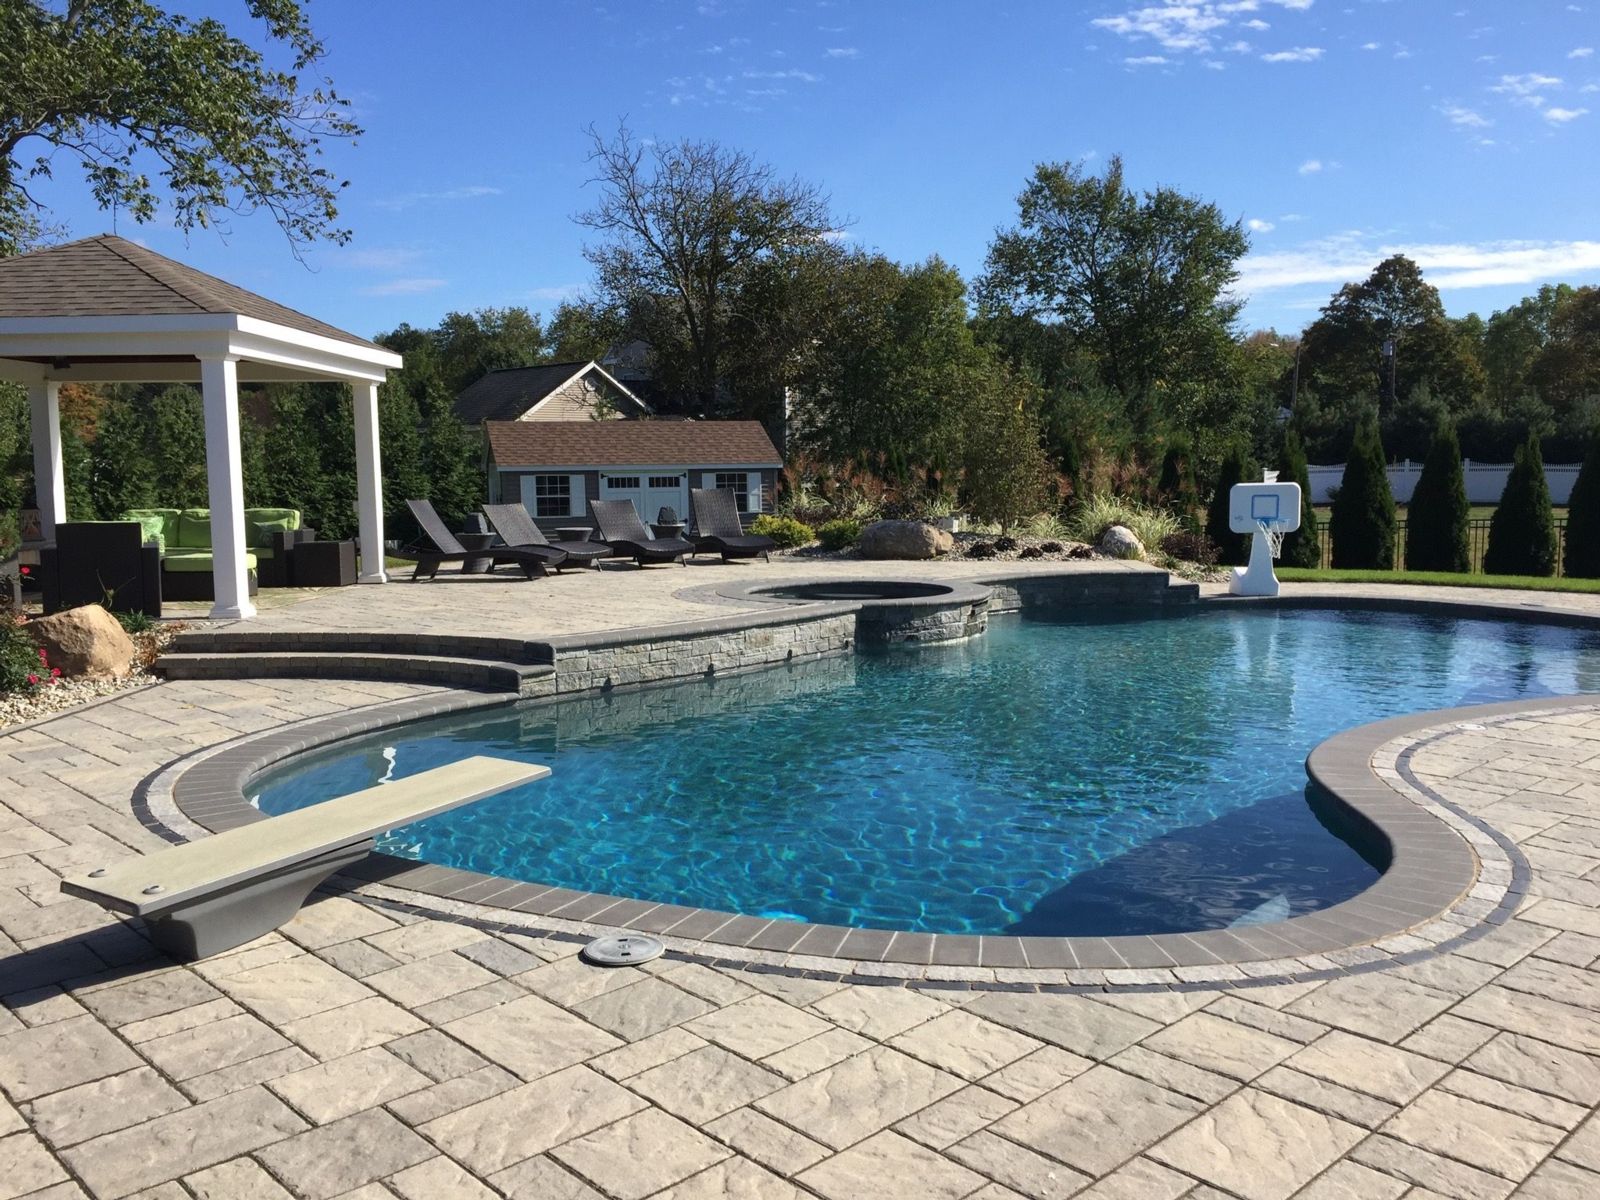 Pool Designs Well Suited to Homeowners with Kids in Farmington, CT